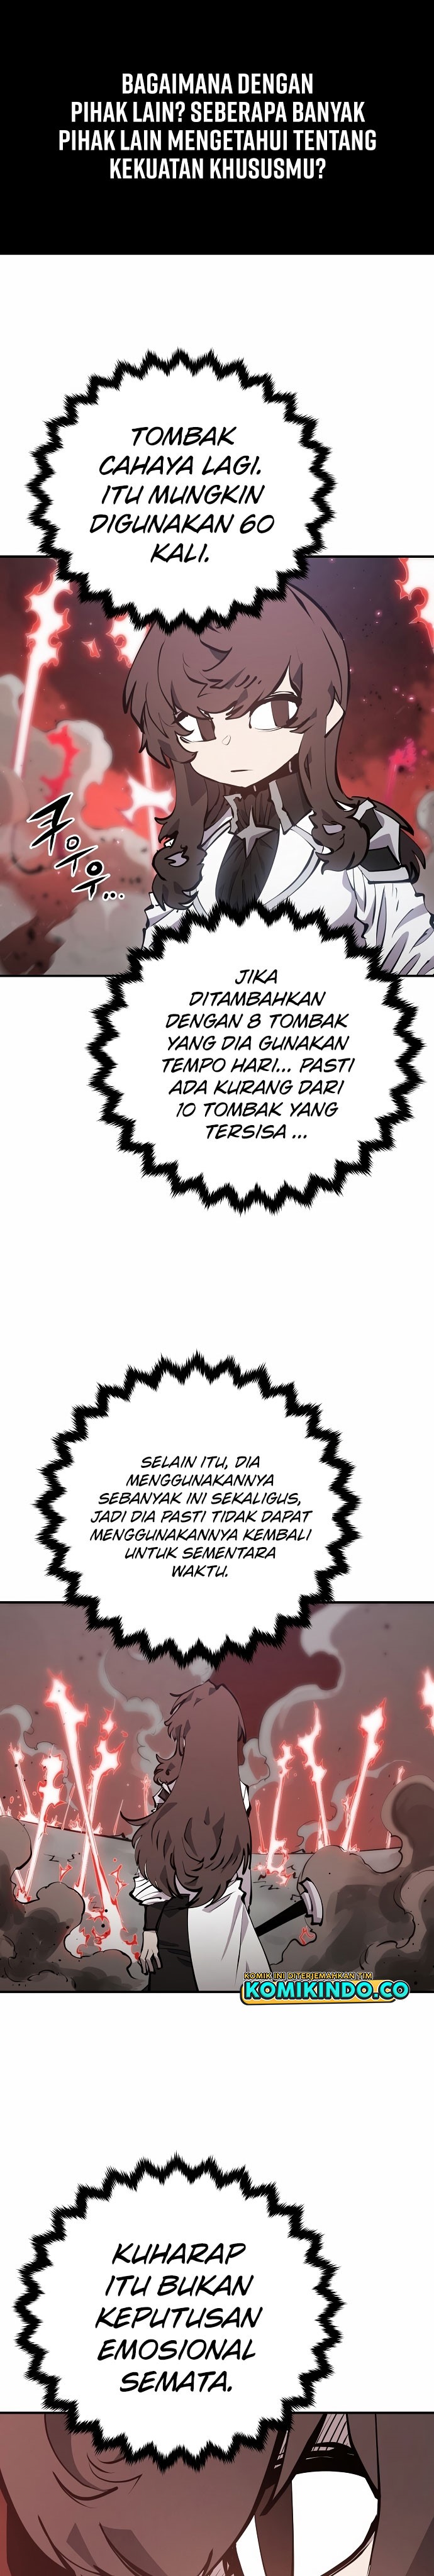 Player Chapter 97 Bahasa Indonesia